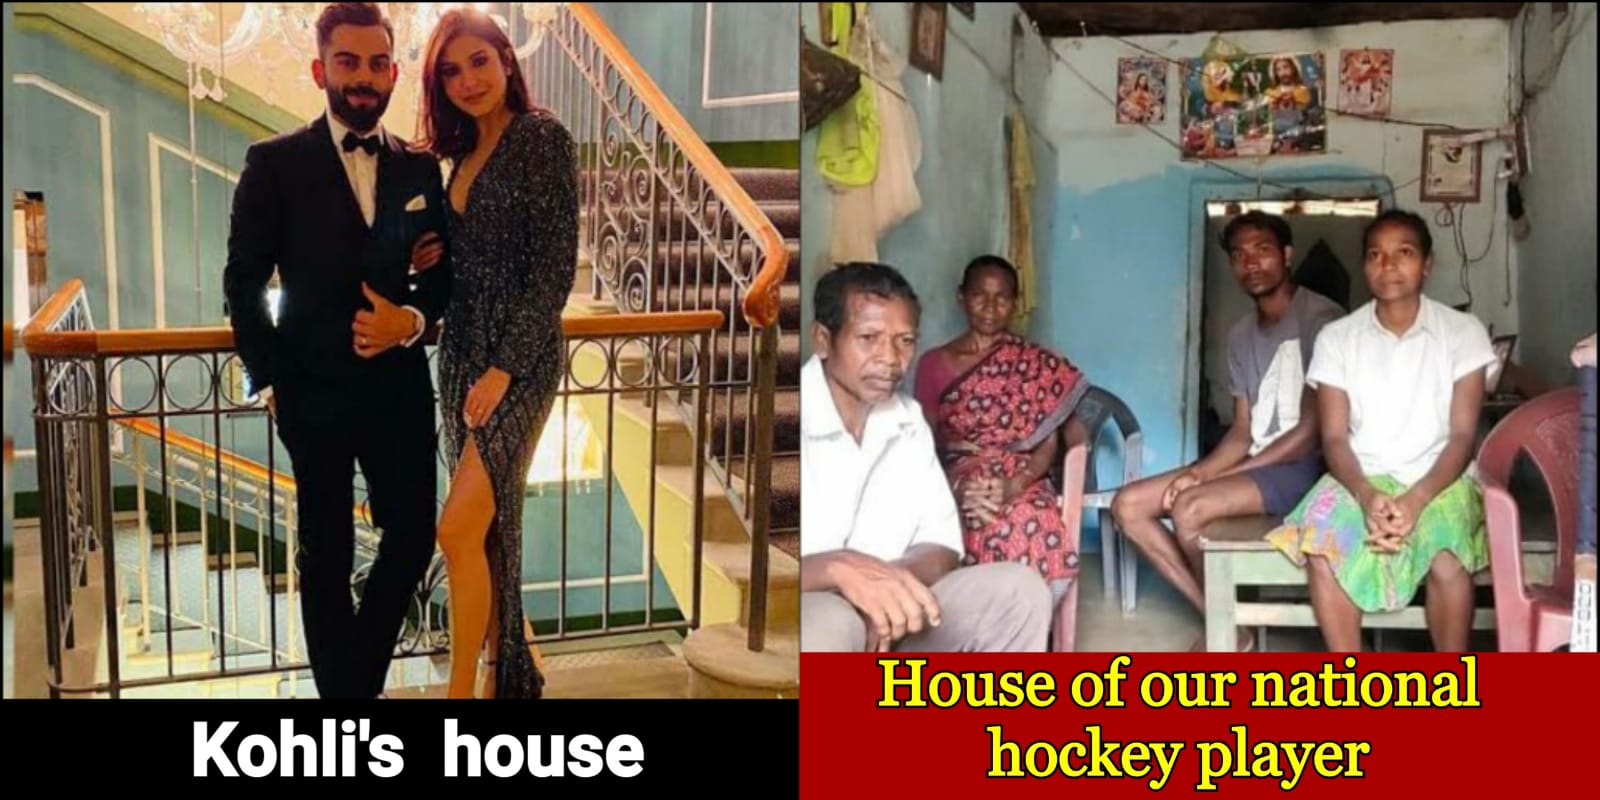 This is the house of India's hockey player who represented us at Tokyo Olympics, Why we don't respect other games?